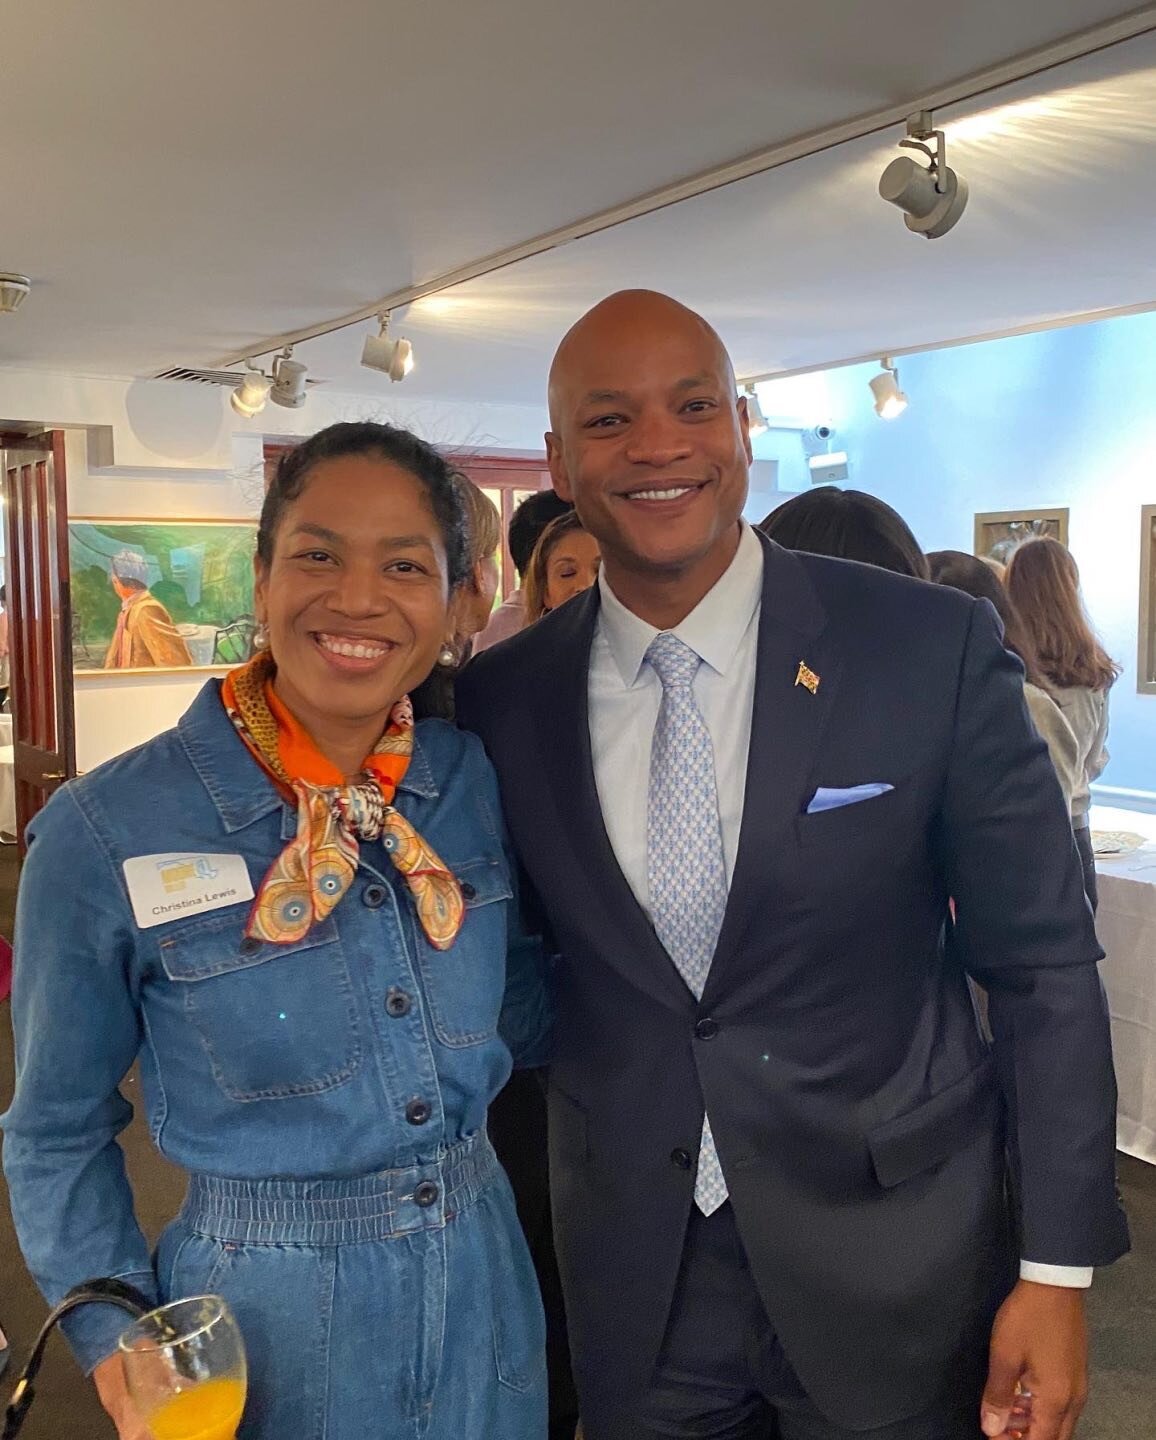 I woke up so happy today because Wes Moore was elected the first Black Governor of the great state of Maryland! Wes is the real deal. He's worked so hard and been so authentic for so long. I am confident he will be a great governor and bring investme